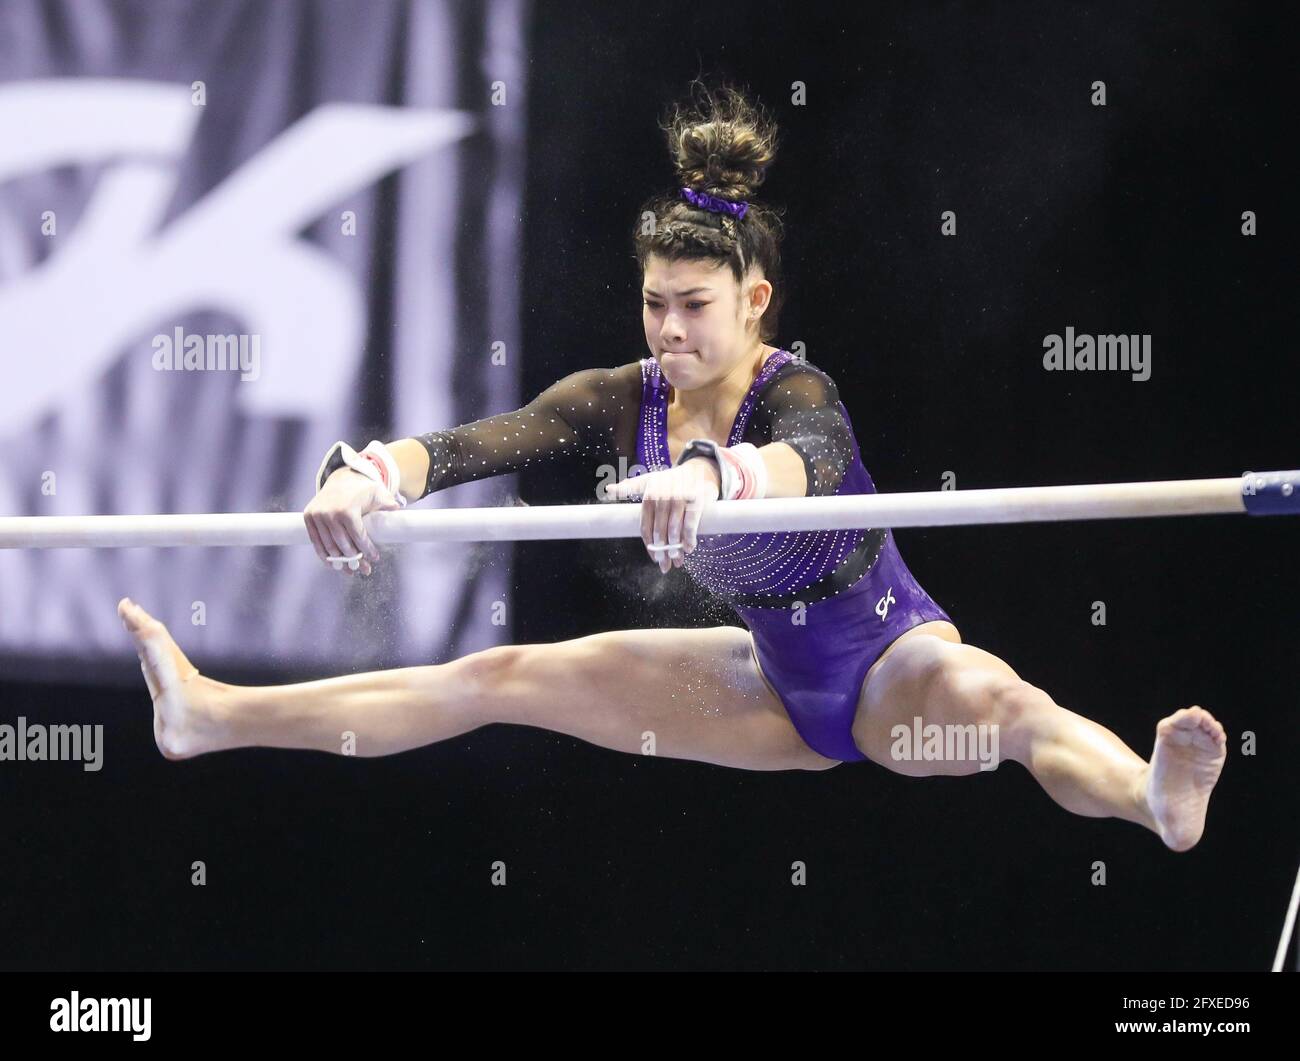 May 22, 2021: Kayla DiCello performs on the uneven bars during the 2021 GK U.S. Classic at the Indiana Convention Center in Indianapolis, IN. Kyle Okita/CSM Stock Photo